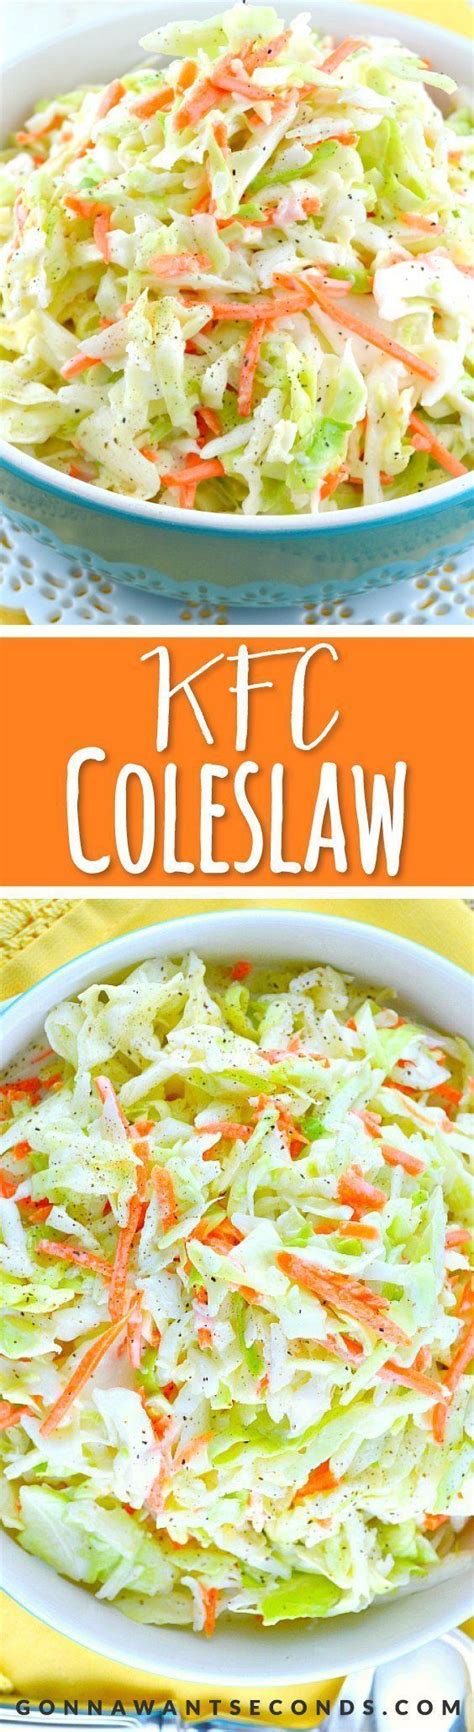 KFC Coleslaw Recipe This Is An Amazing Copycat Version Of The Famous